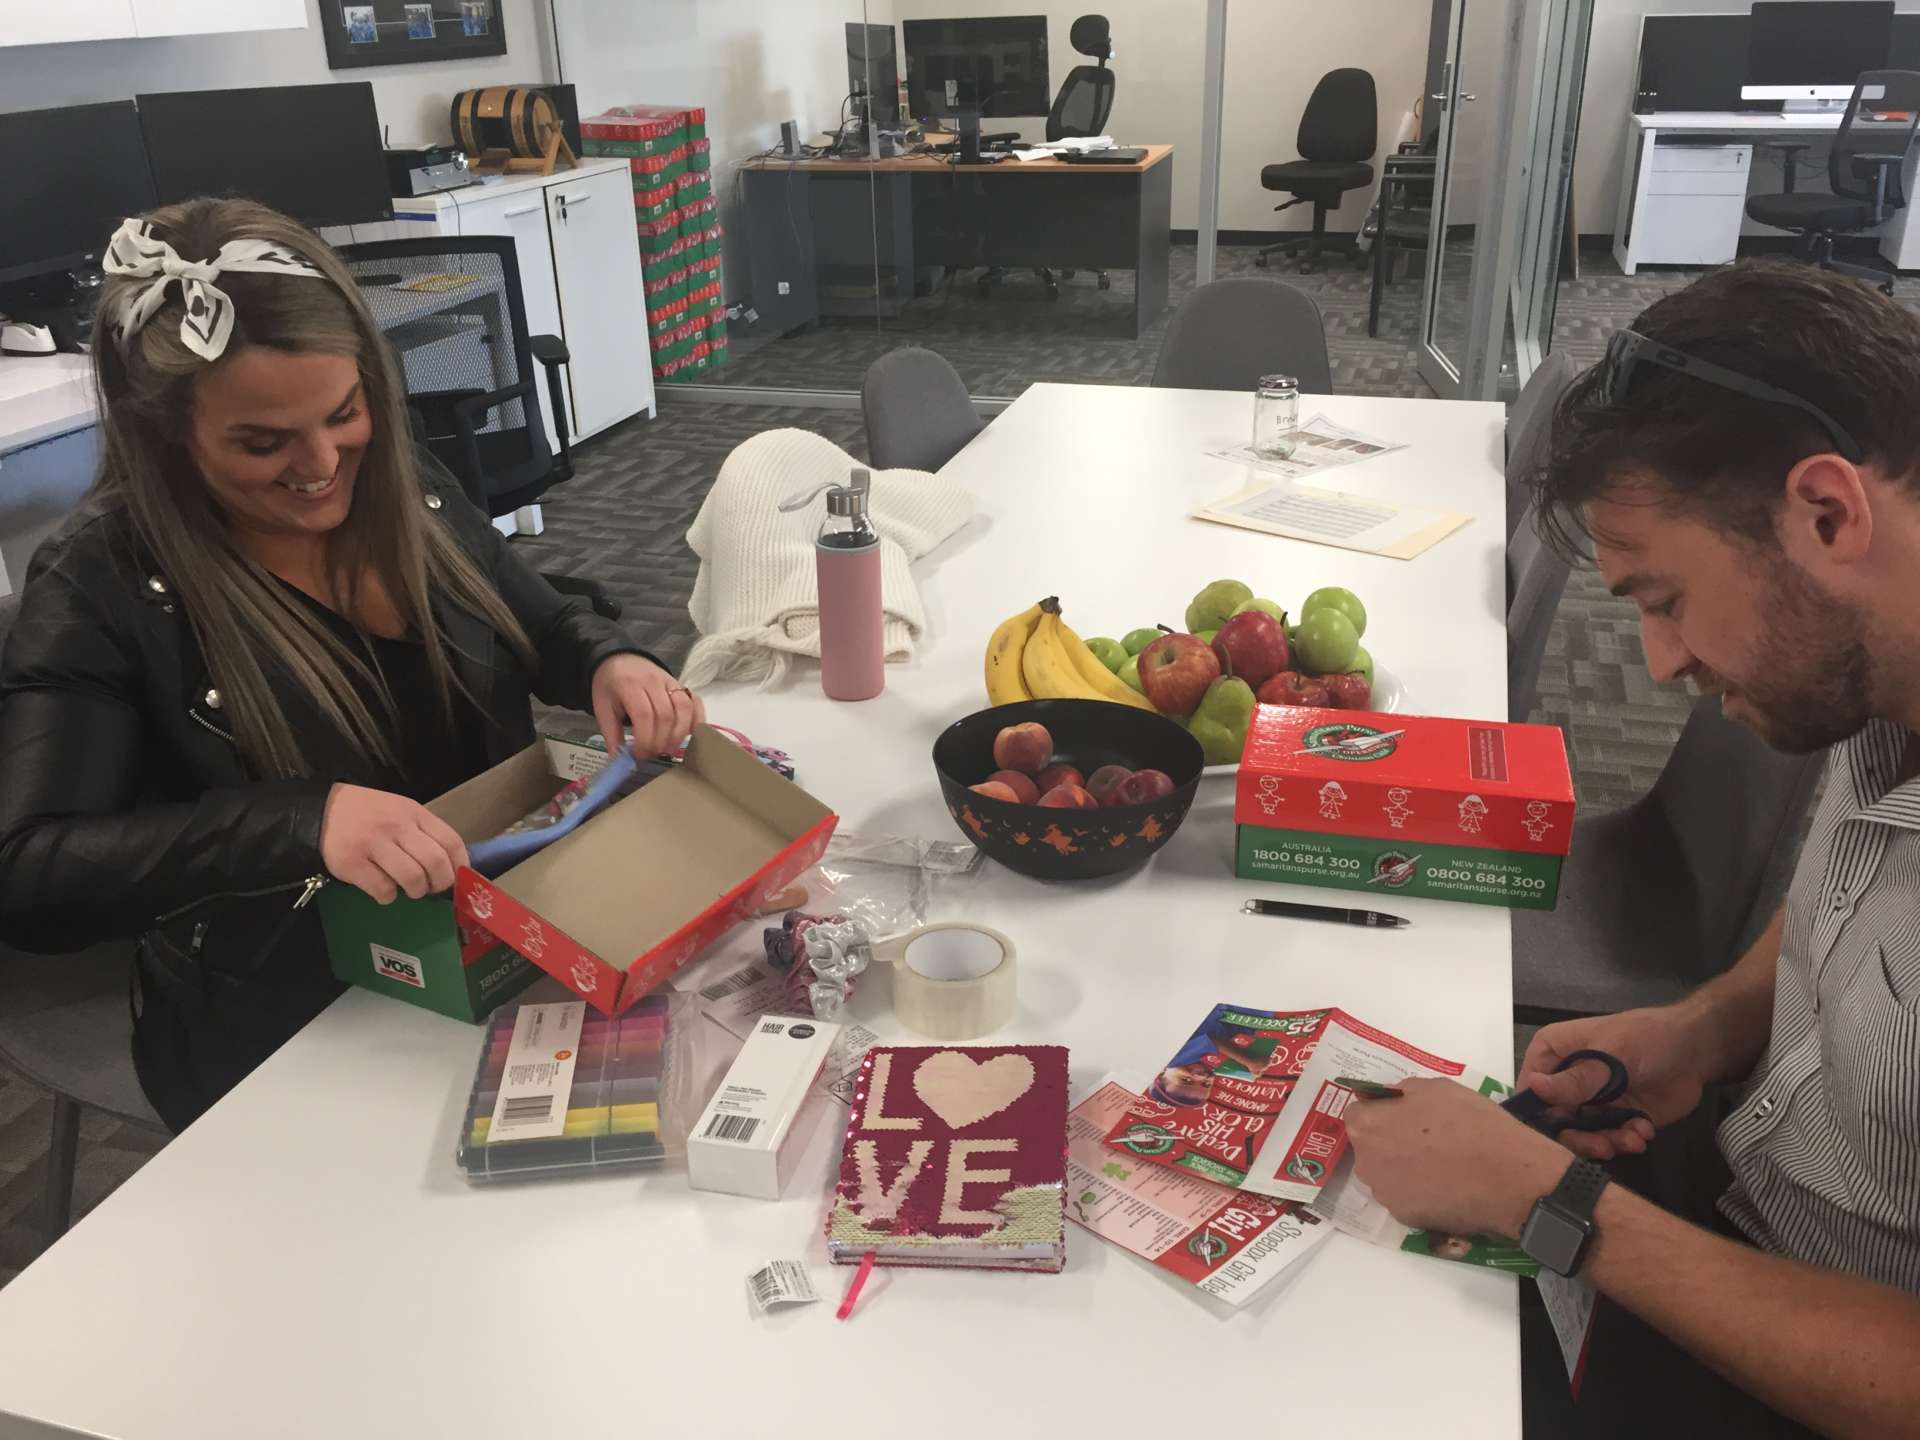 AOL gets into Christmas spirit - Acting Branding Manager Mary Moloney and SA General Manager David Wegener fill their shoeboxes, Australian Outdoor Living.